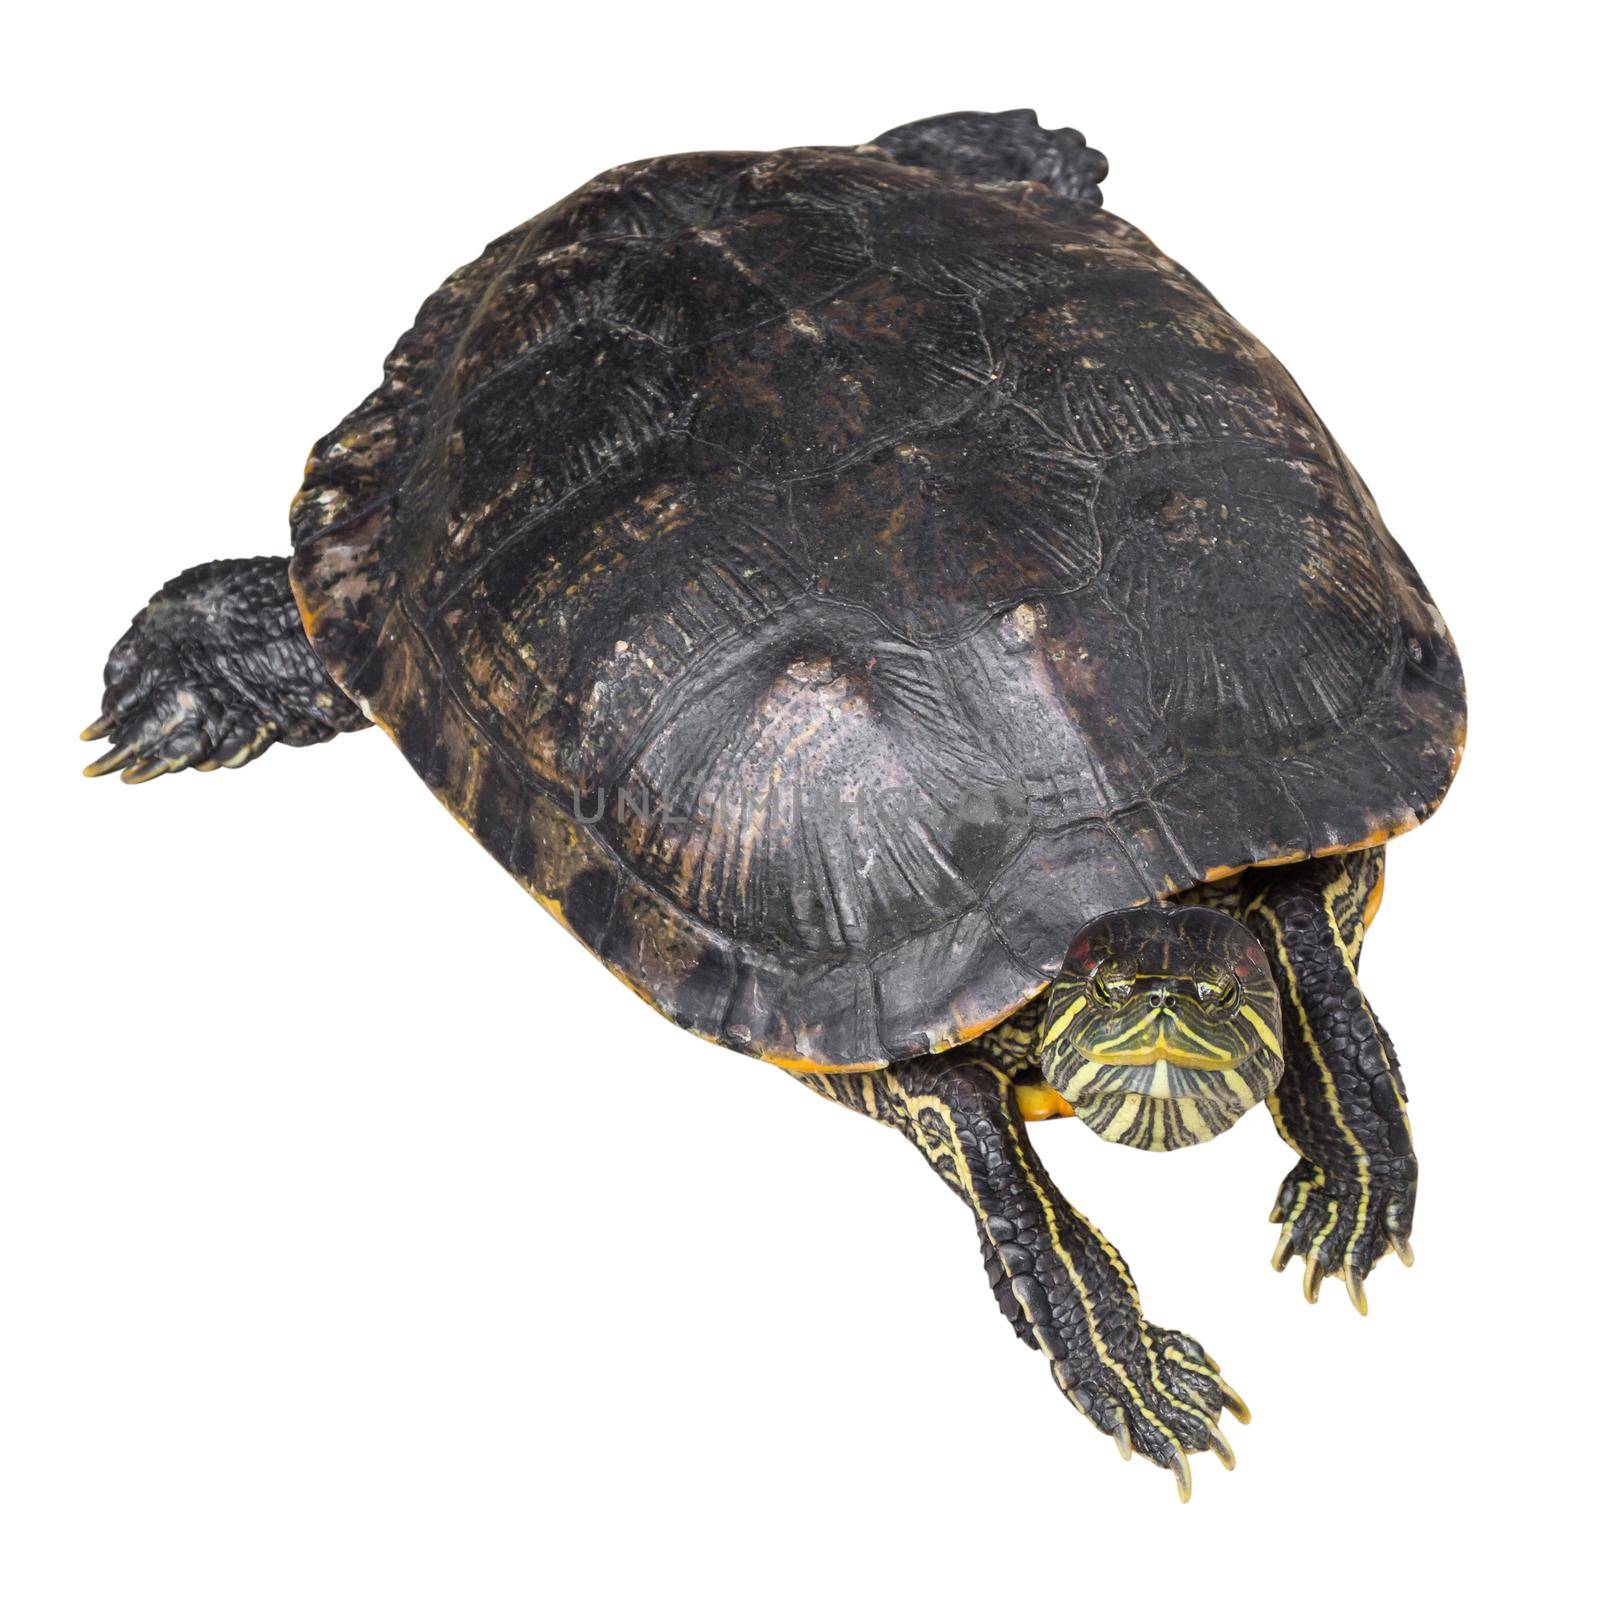 Red eared slider turtle ( Trachemys scripta elegans ) is creeping and raise one's head on white isolated background . Top view .